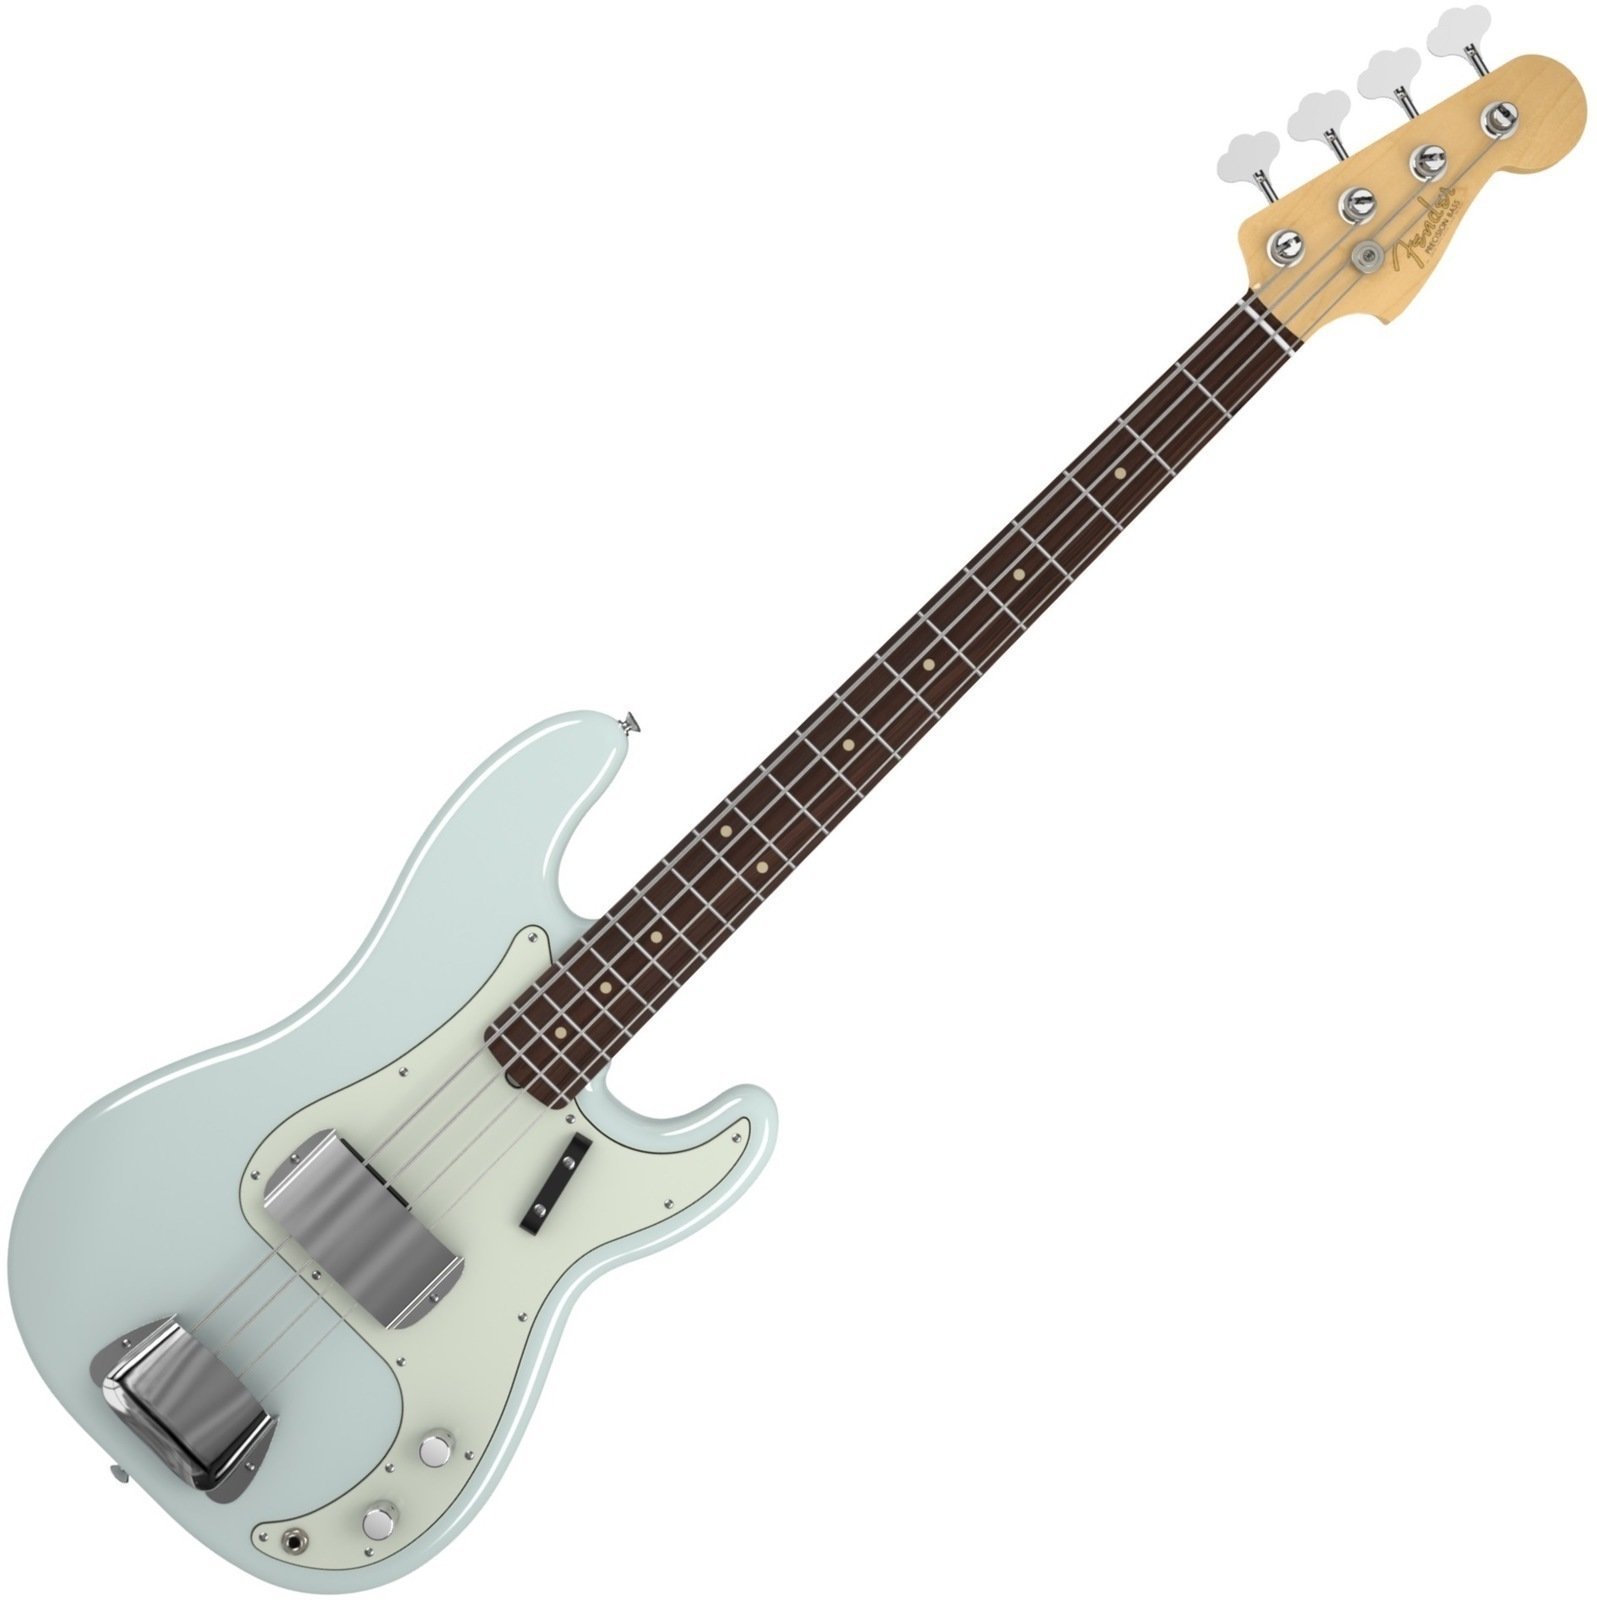 4-string Bassguitar Fender American Vintage '63 Precision Bass, Rosewood Fingerboard, Faded Sonic Blue